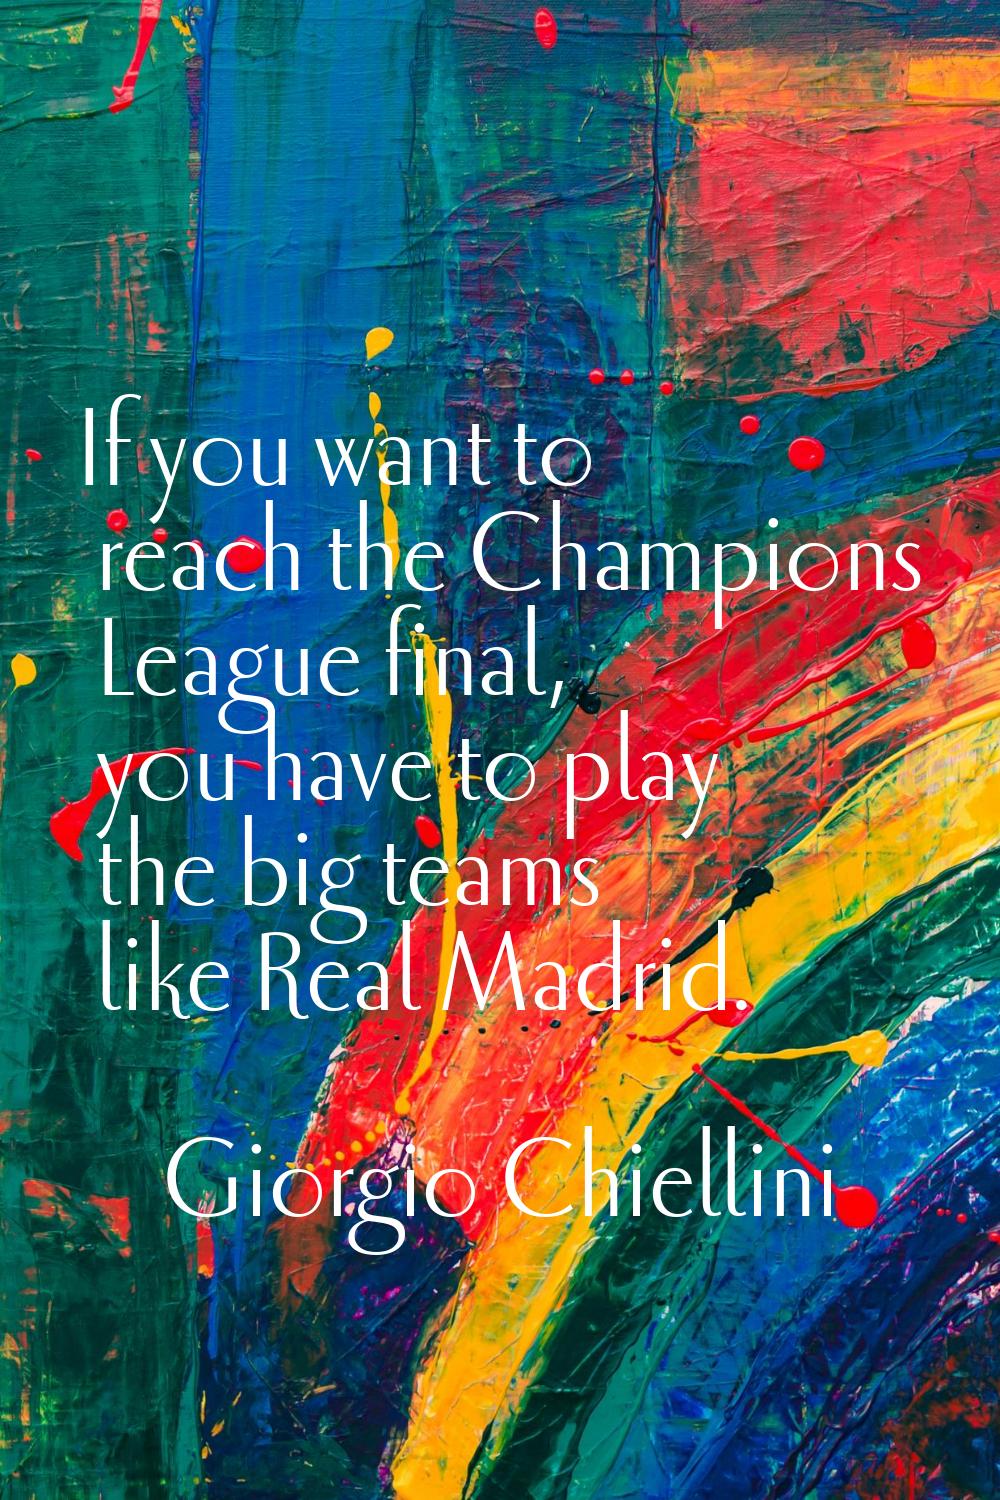 If you want to reach the Champions League final, you have to play the big teams like Real Madrid.